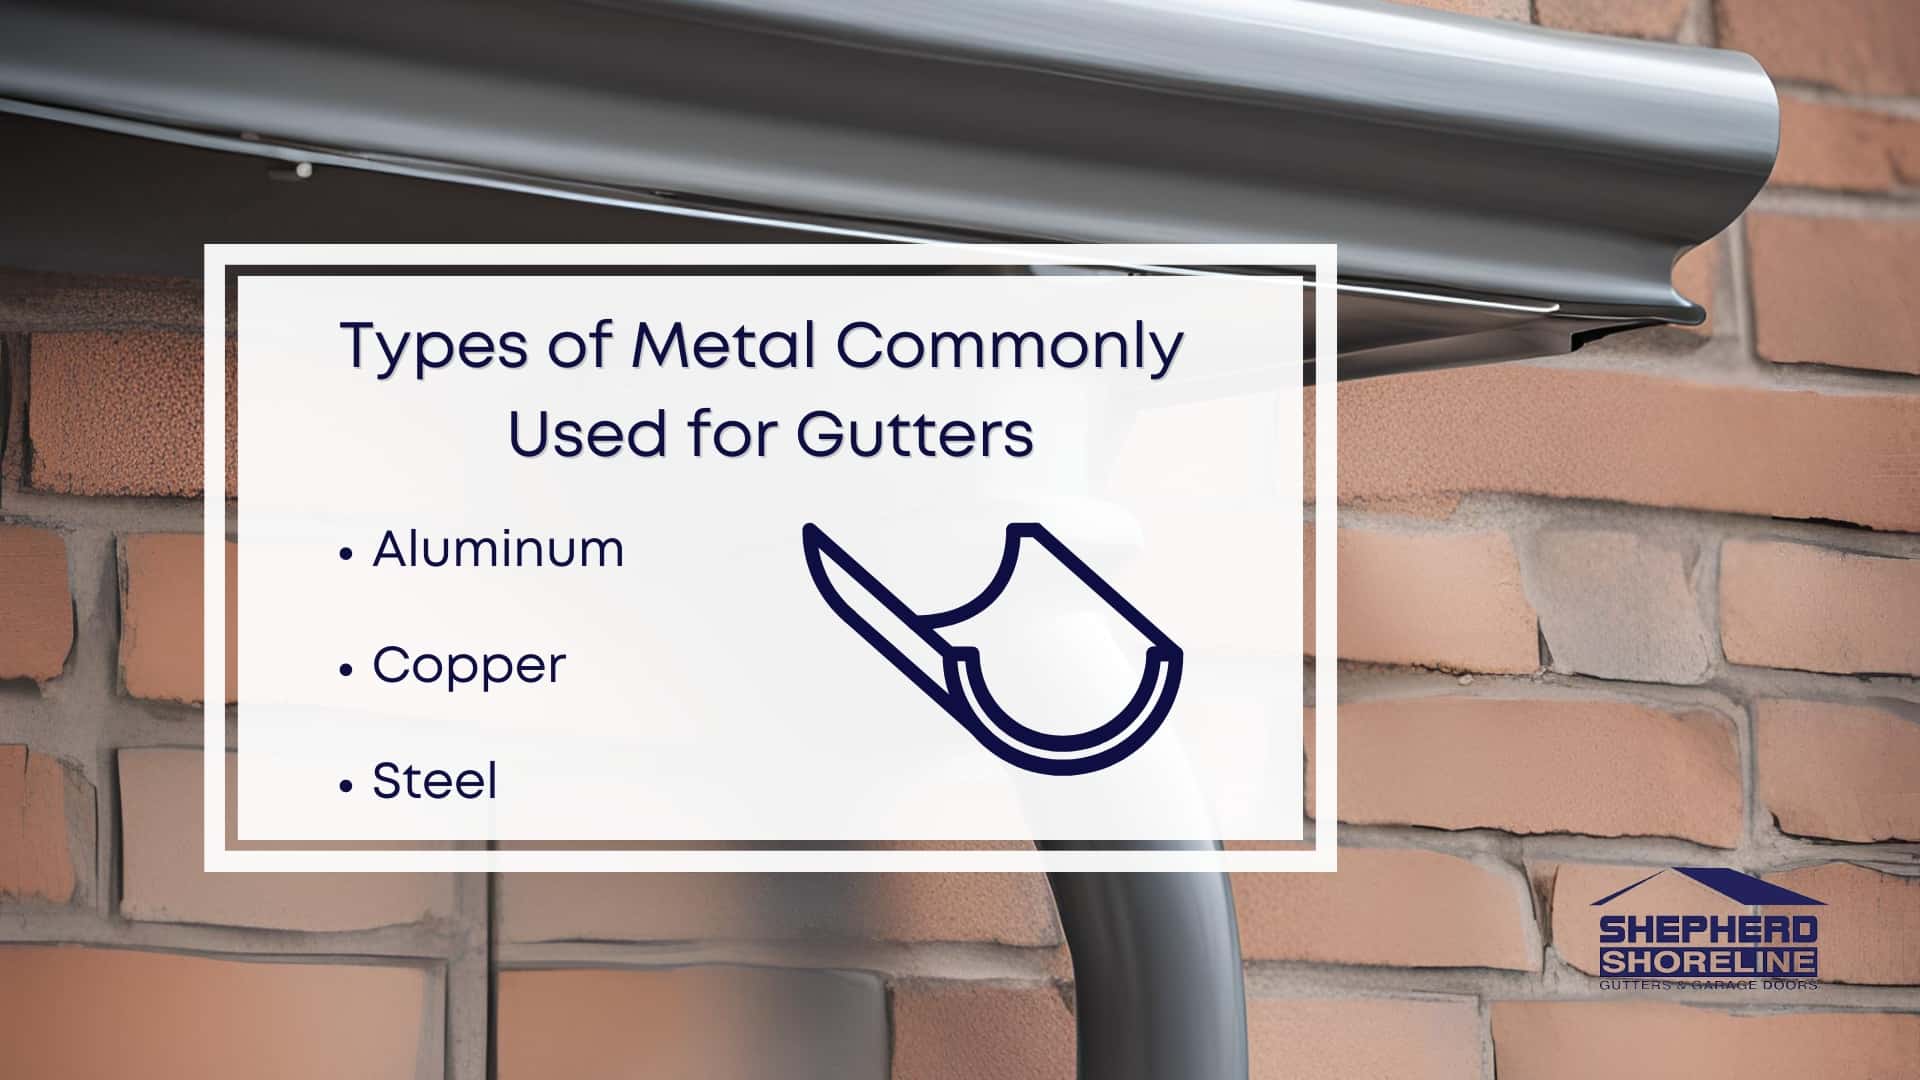 Infographic image of types of metal commonly used for gutters